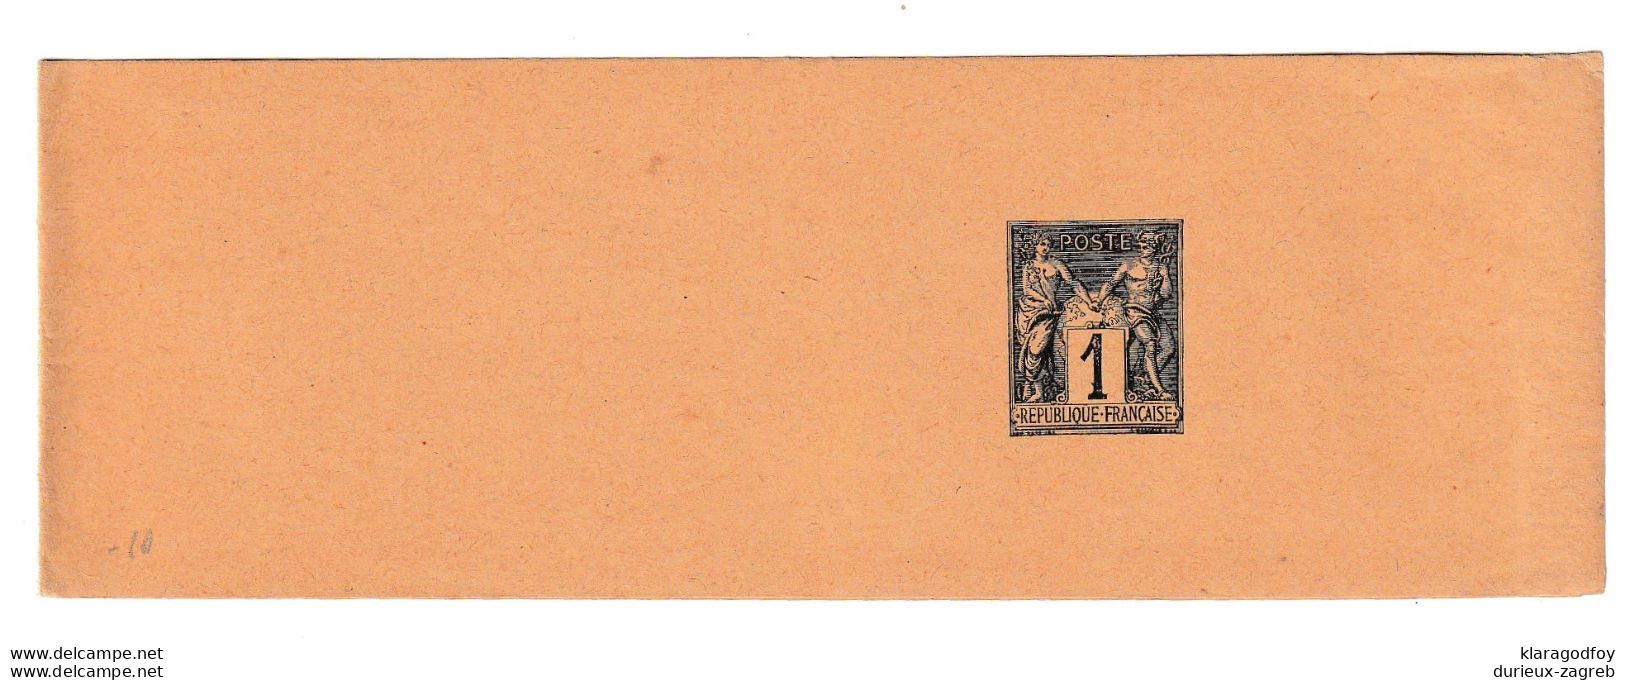 France 1c Postal Stationery Newspaper Wraper Not Posted B210301 - Periódicos